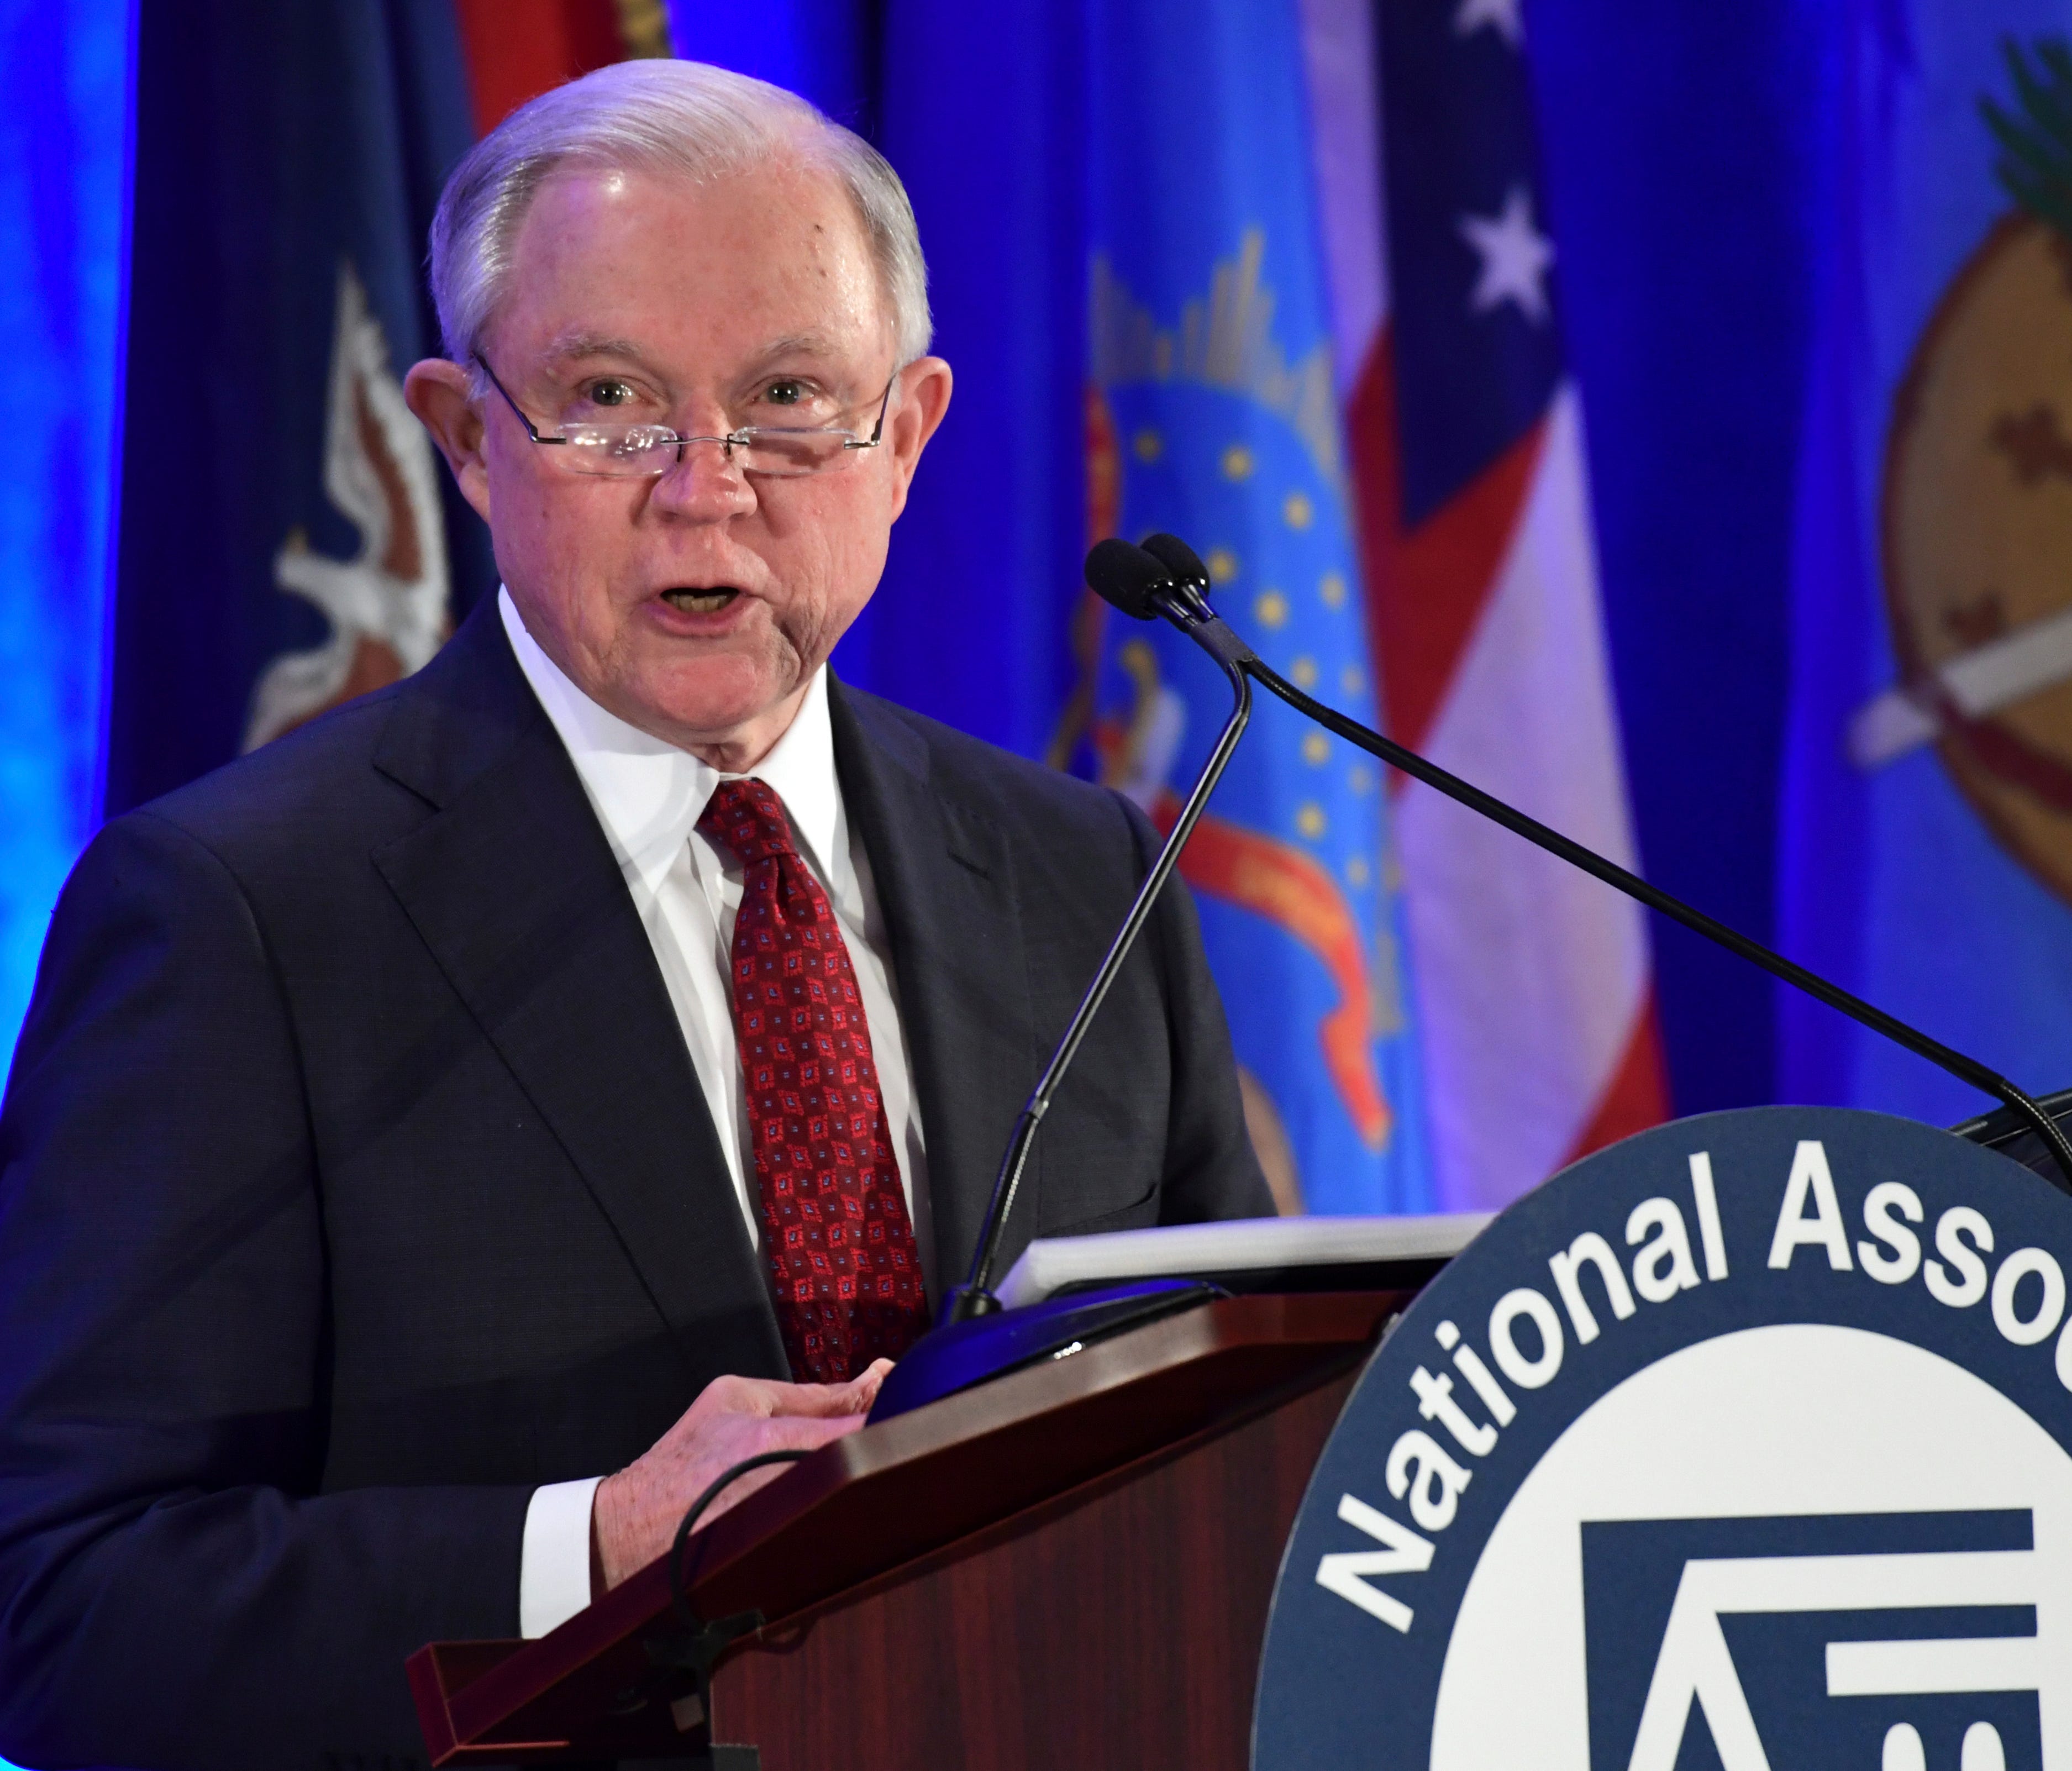 Attorney General Jeff Sessions is pictured speaking at the National Association of Attorneys General Winter Meeting in Washington D.C.